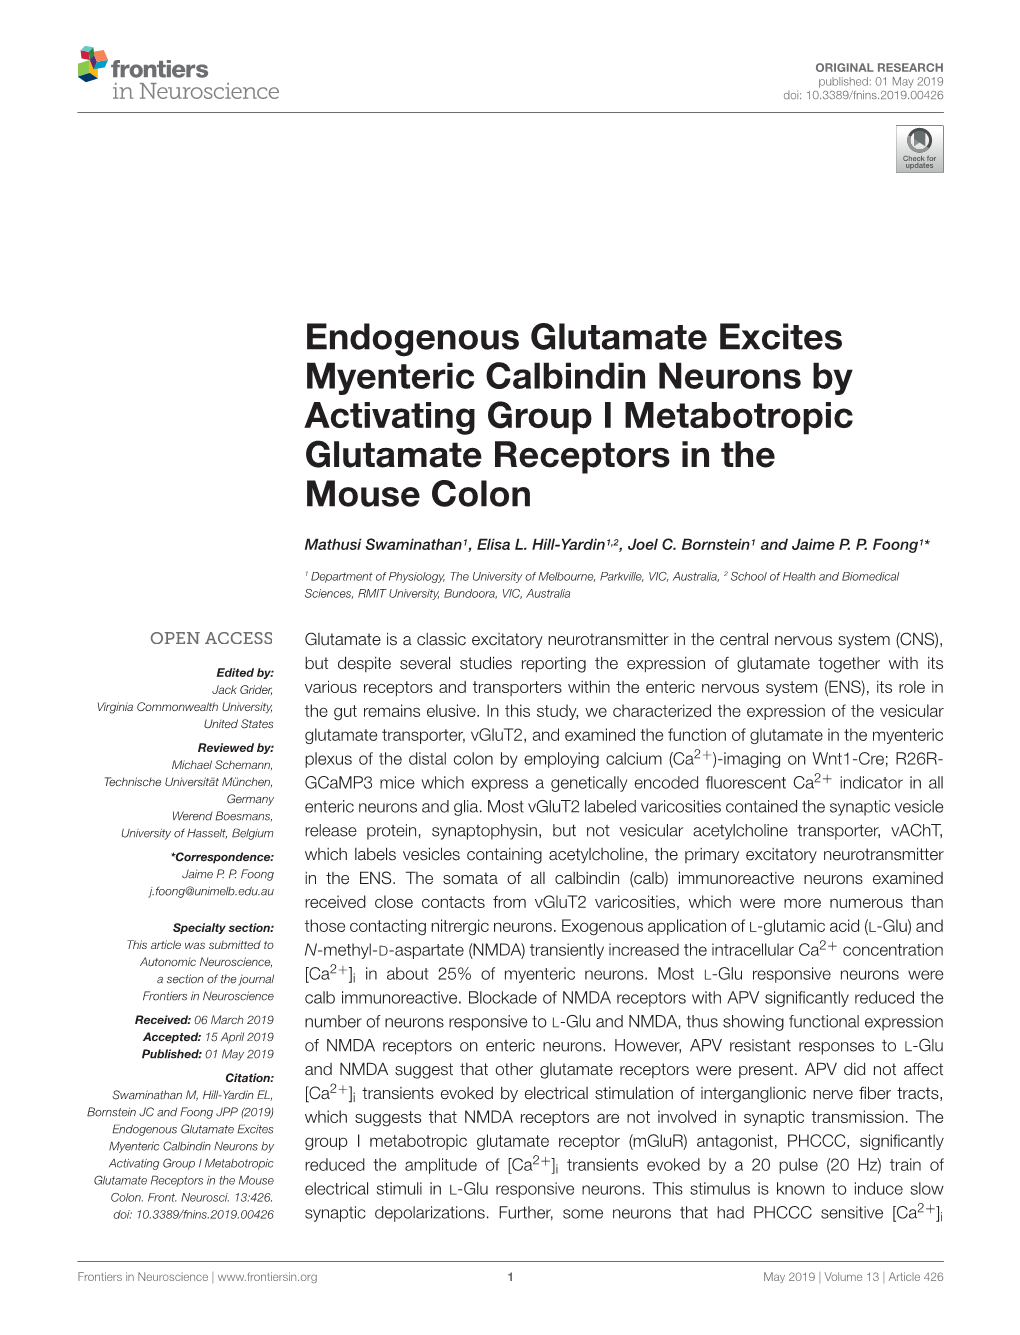 Endogenous Glutamate Excites Myenteric Calbindin Neurons by Activating Group I Metabotropic Glutamate Receptors in the Mouse Colon